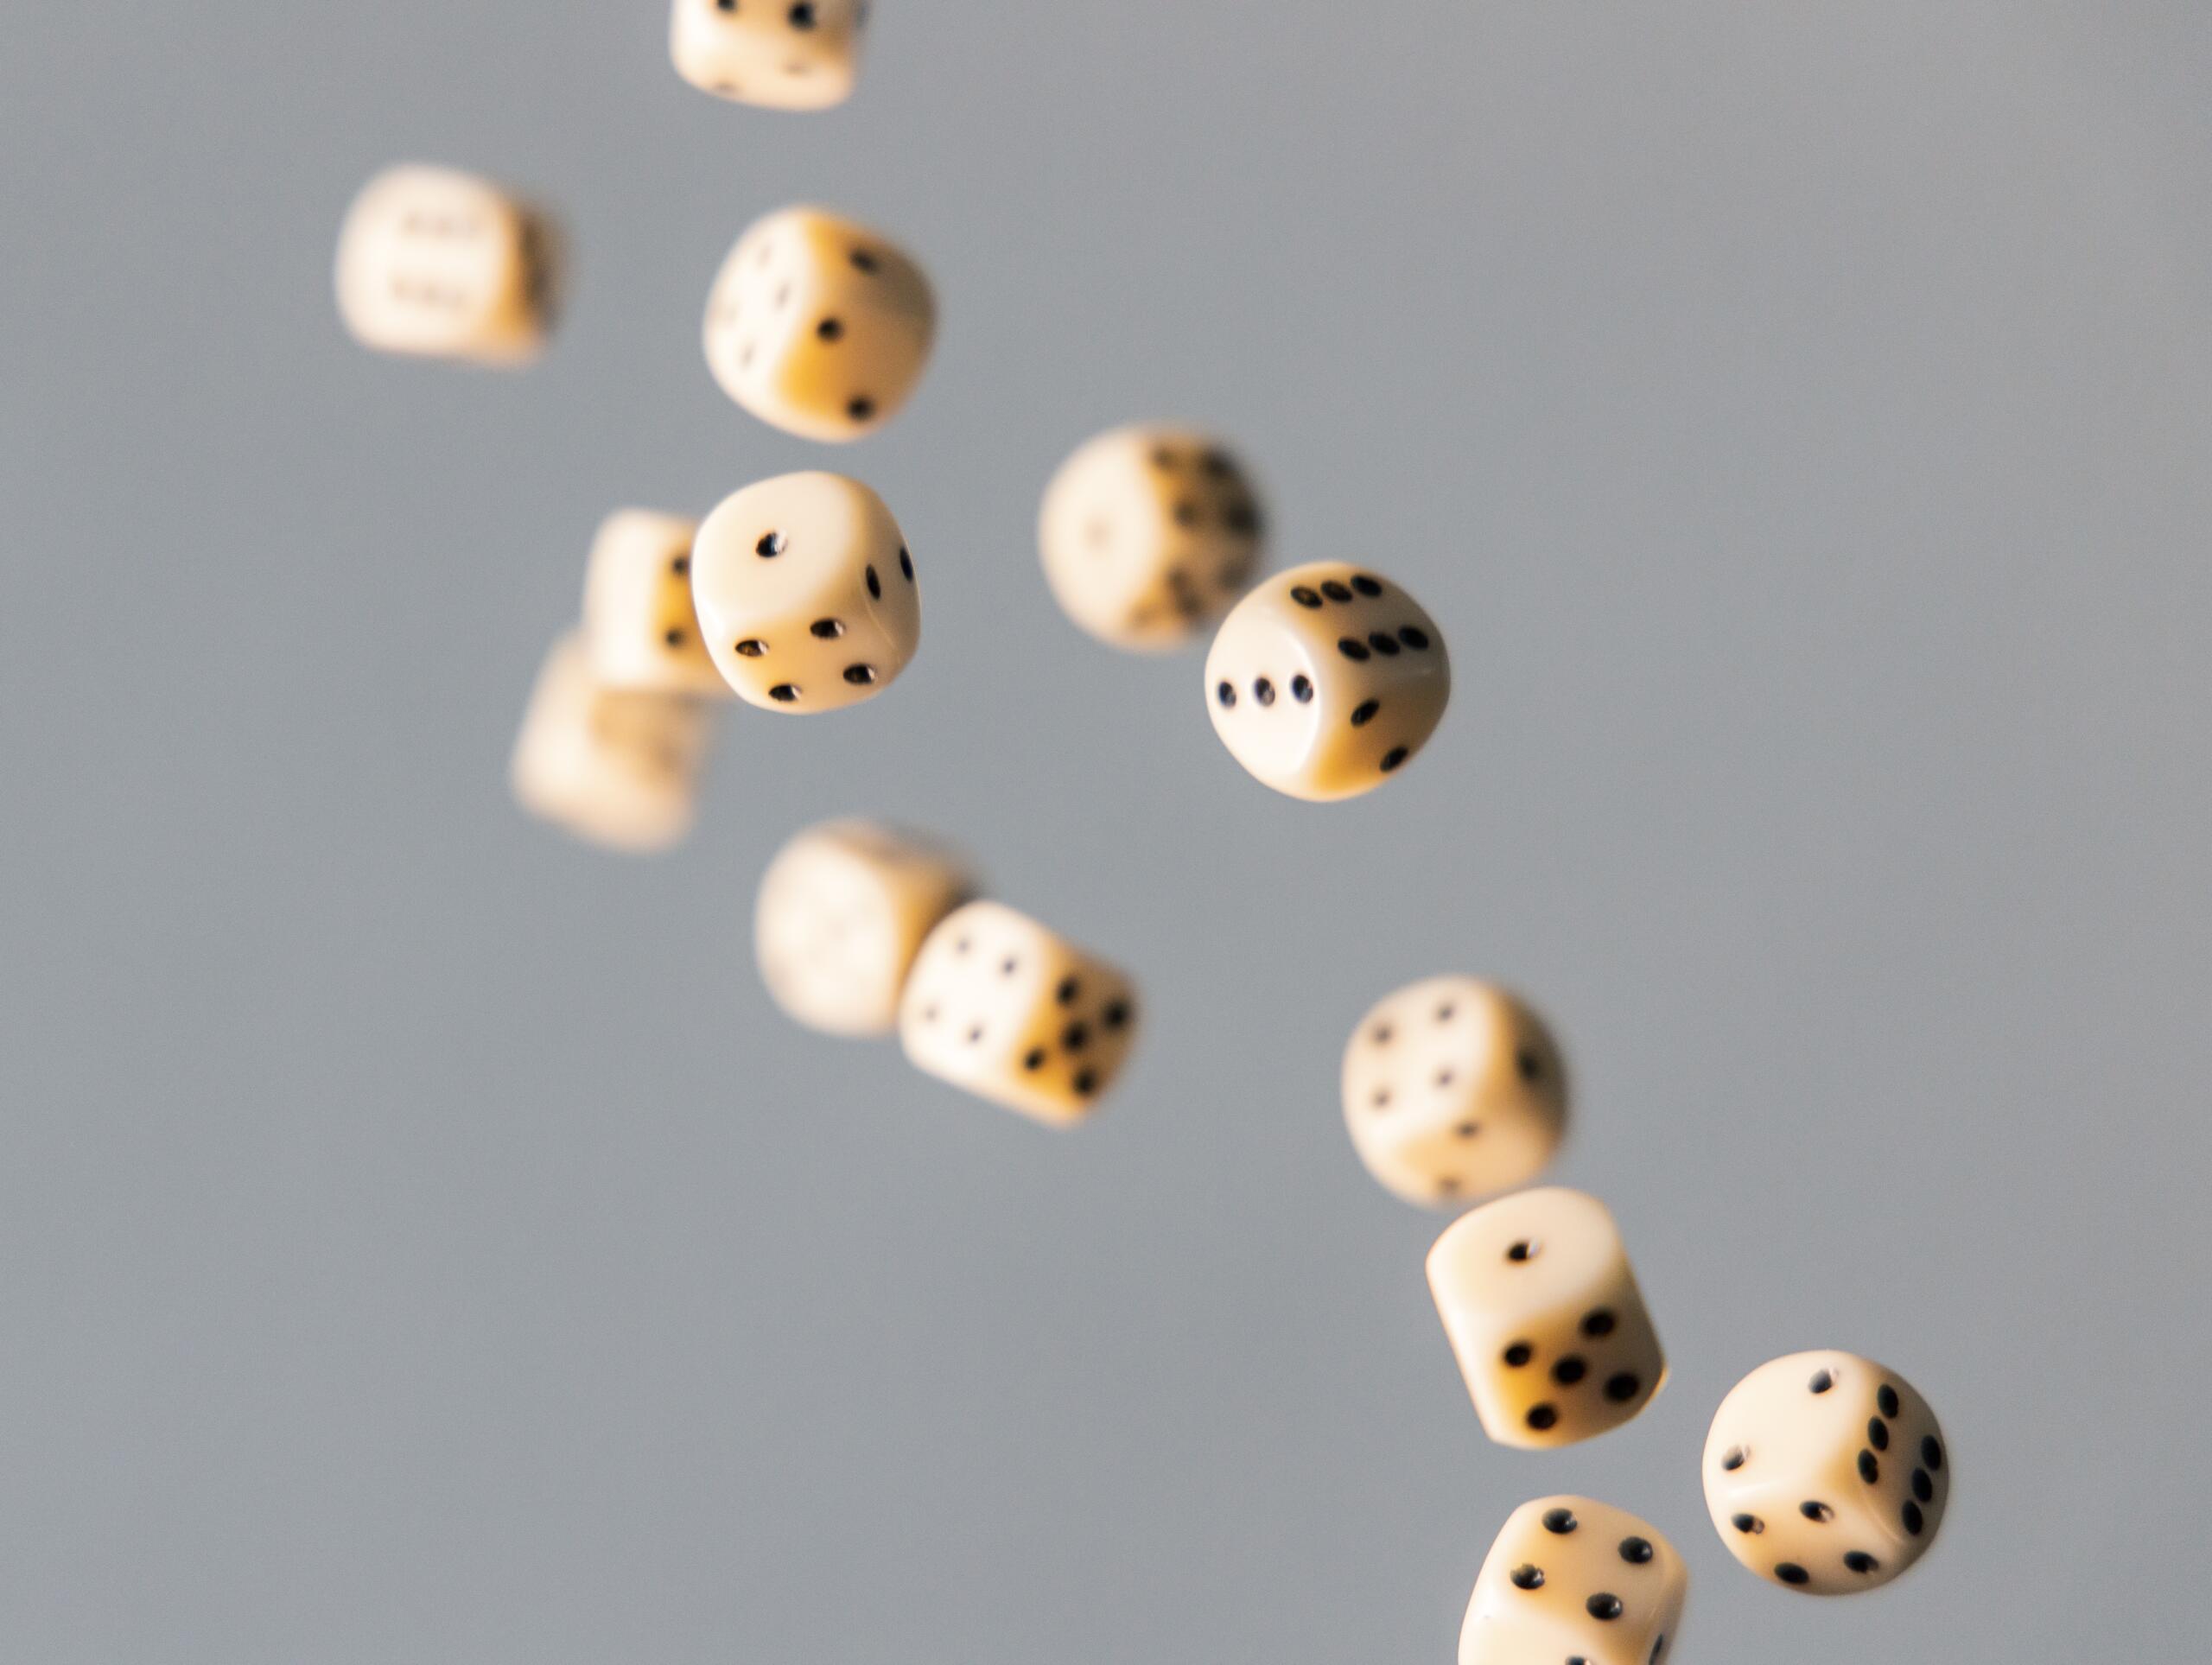 Several dices fly through the air.